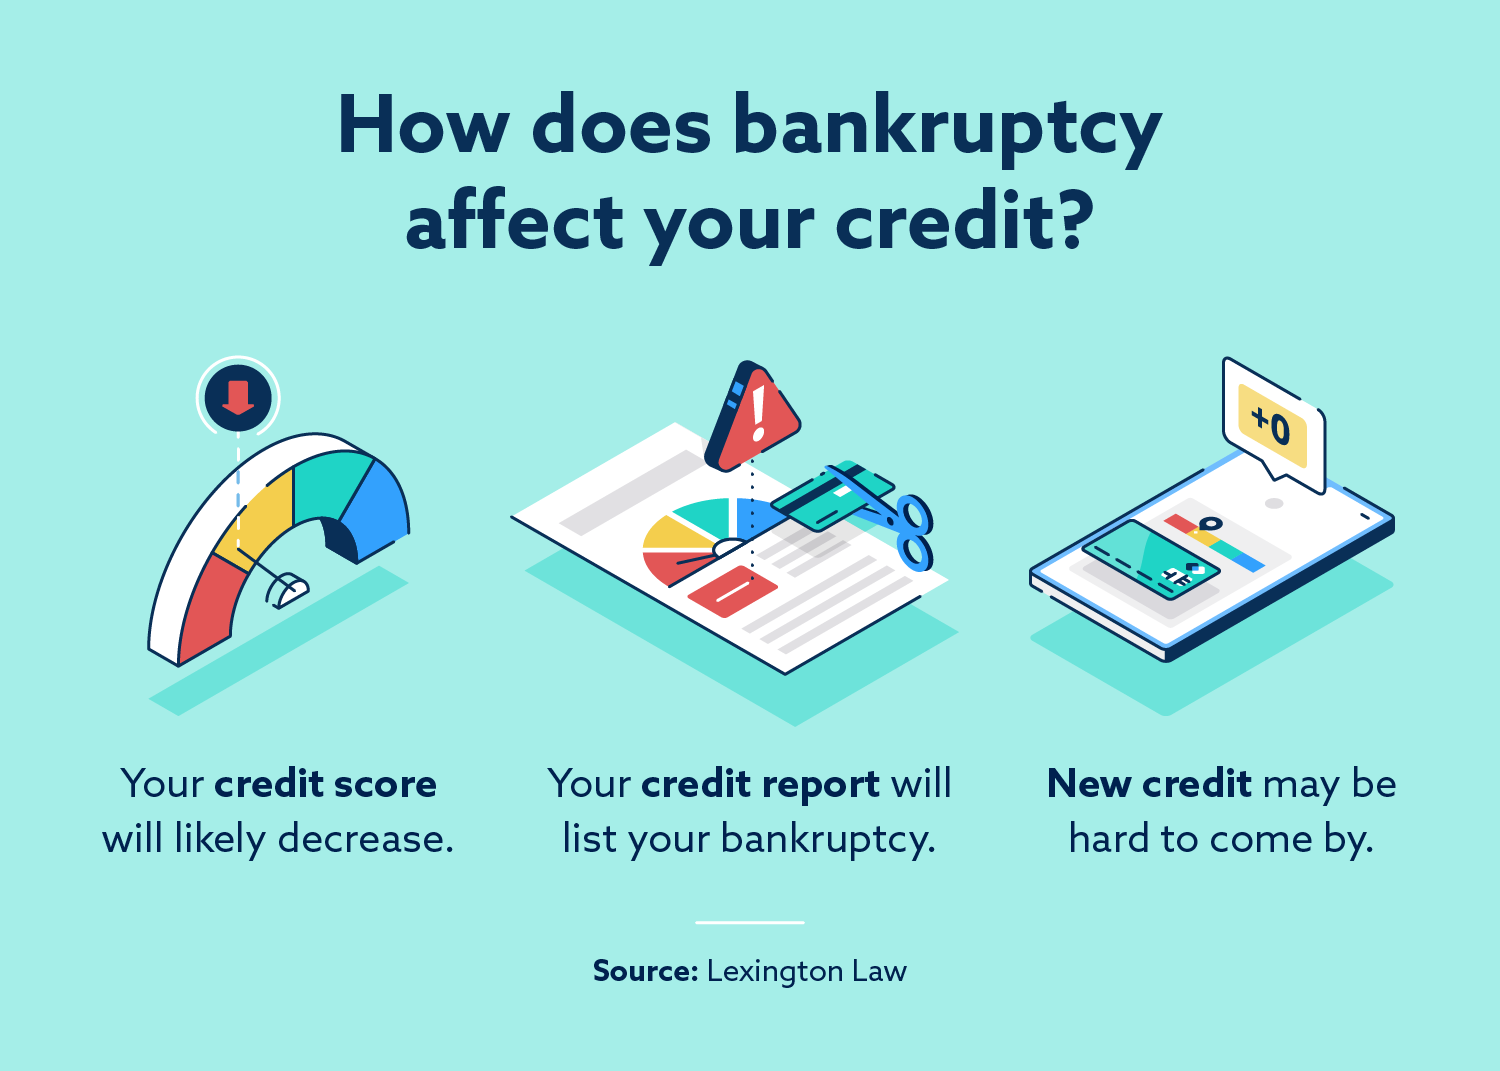 How does bankruptcy affect your credit?